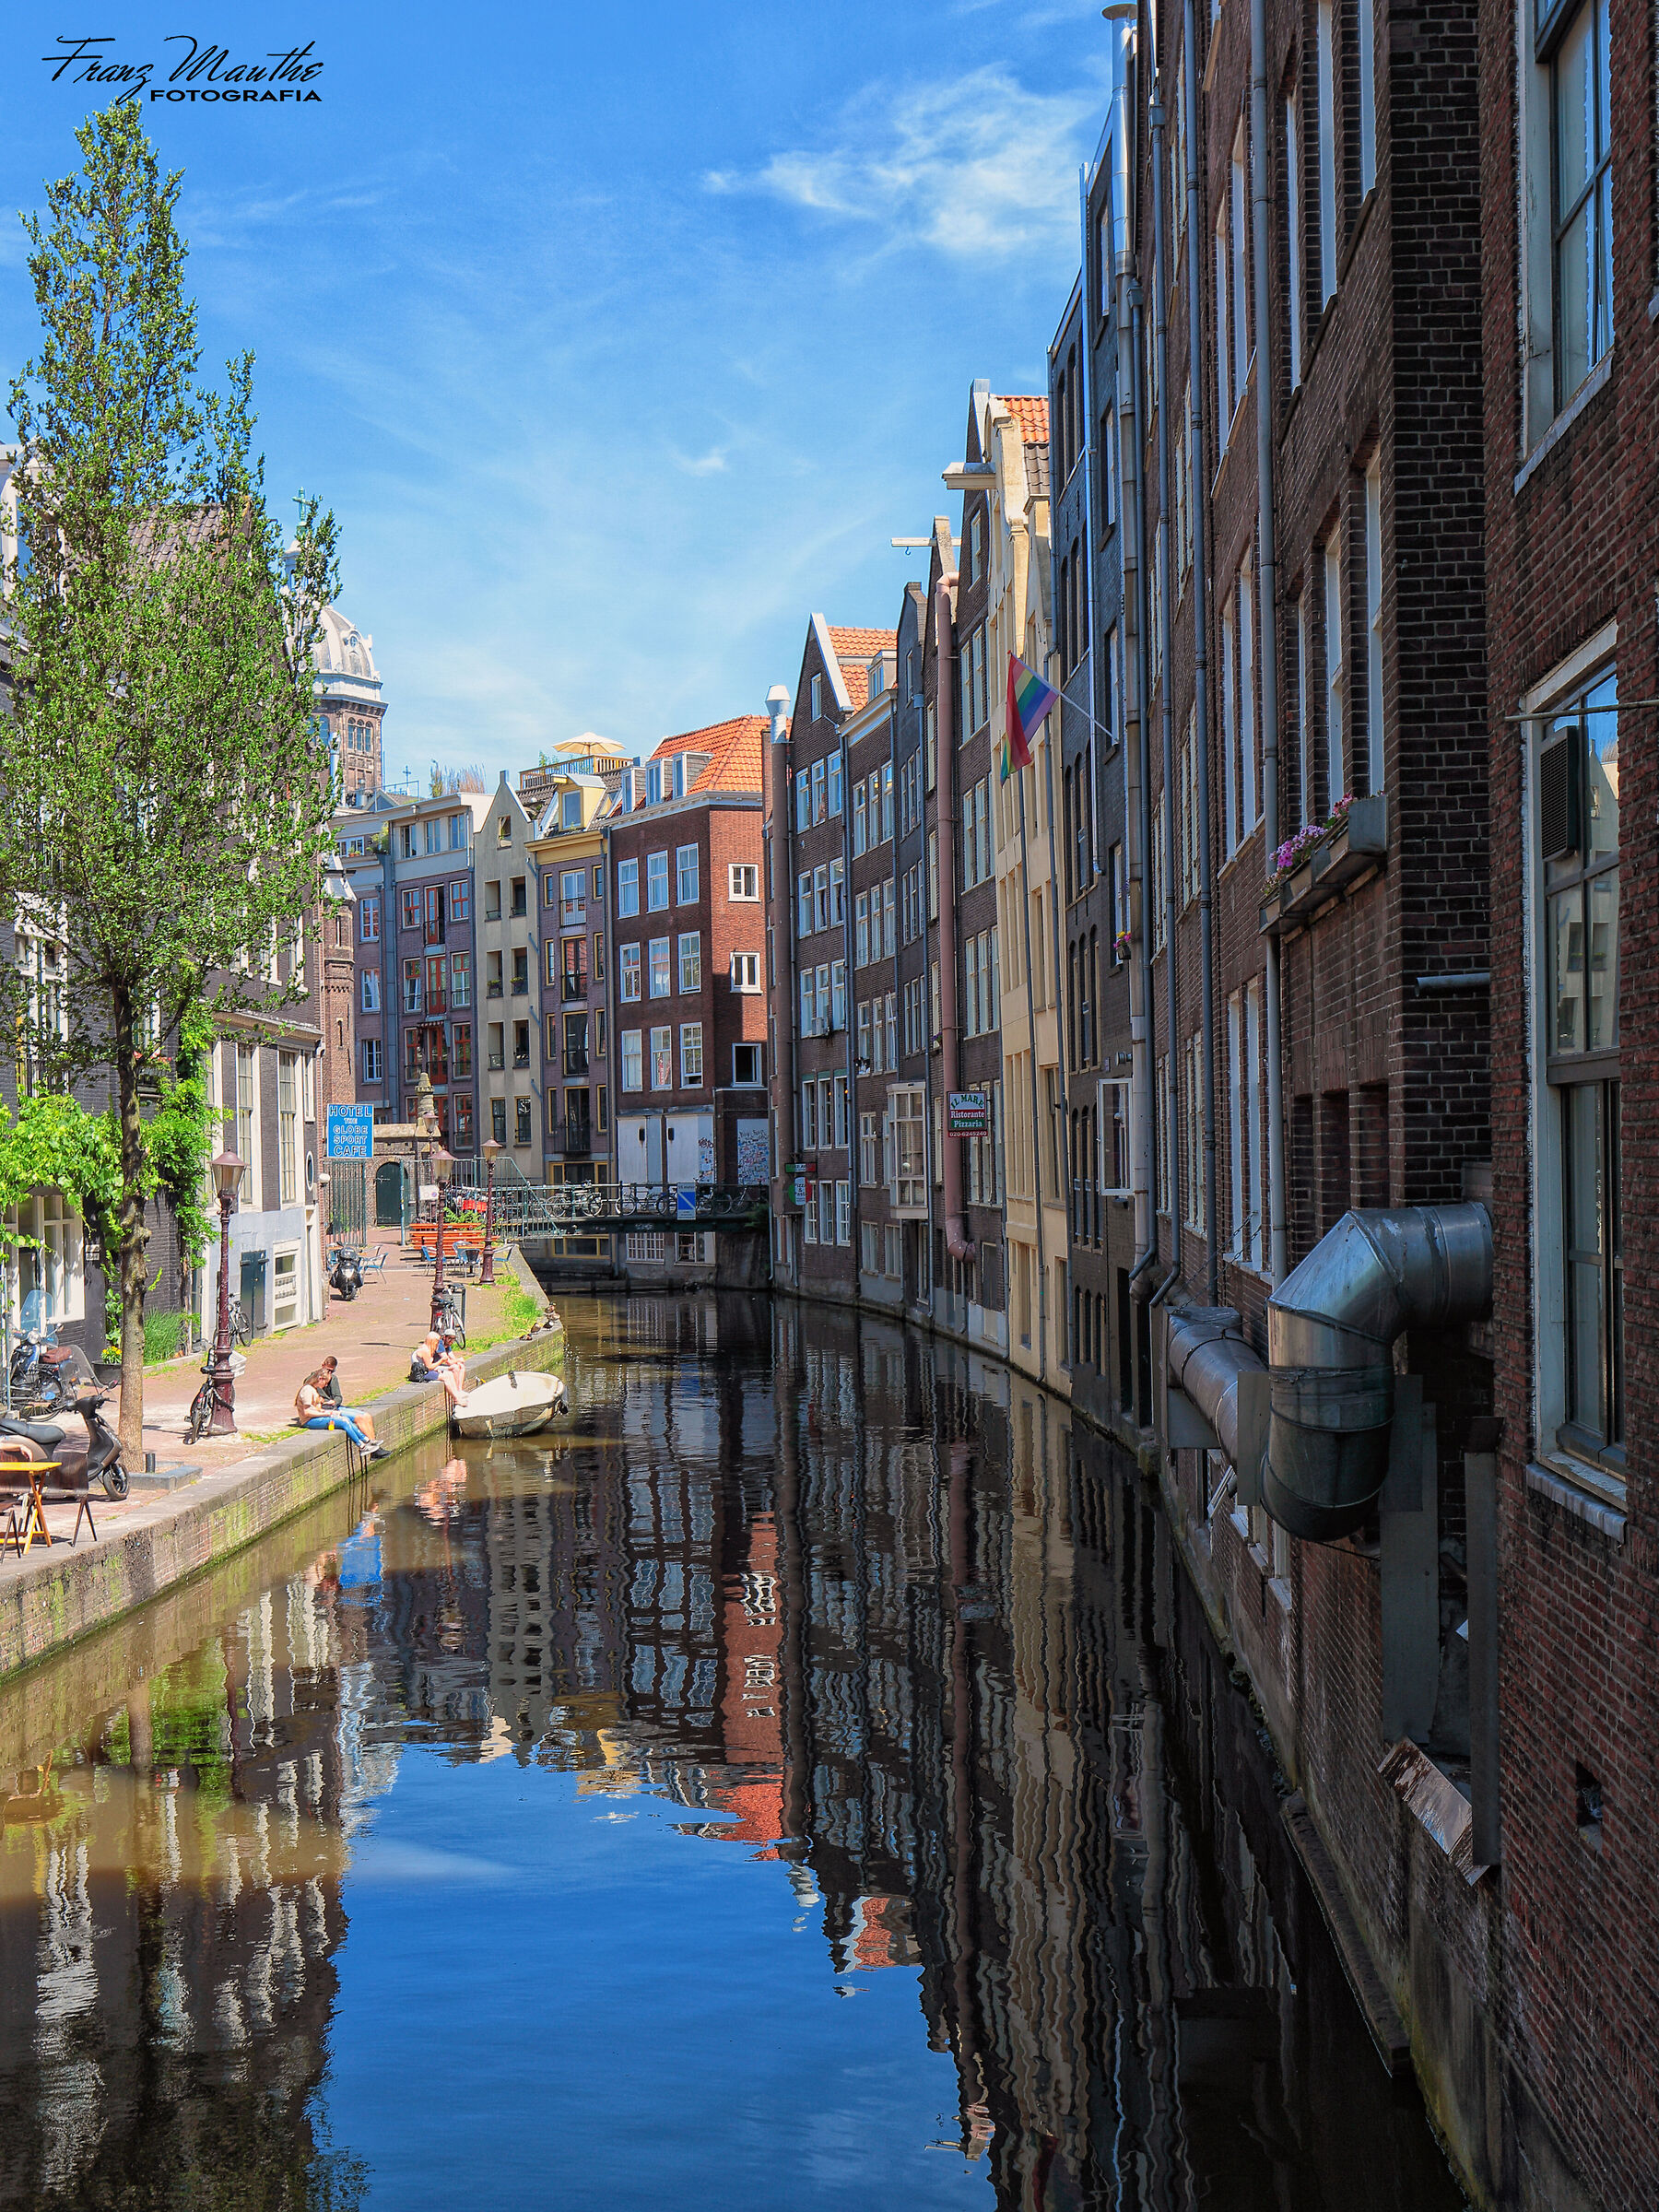 Amsterdam - A curved canal...